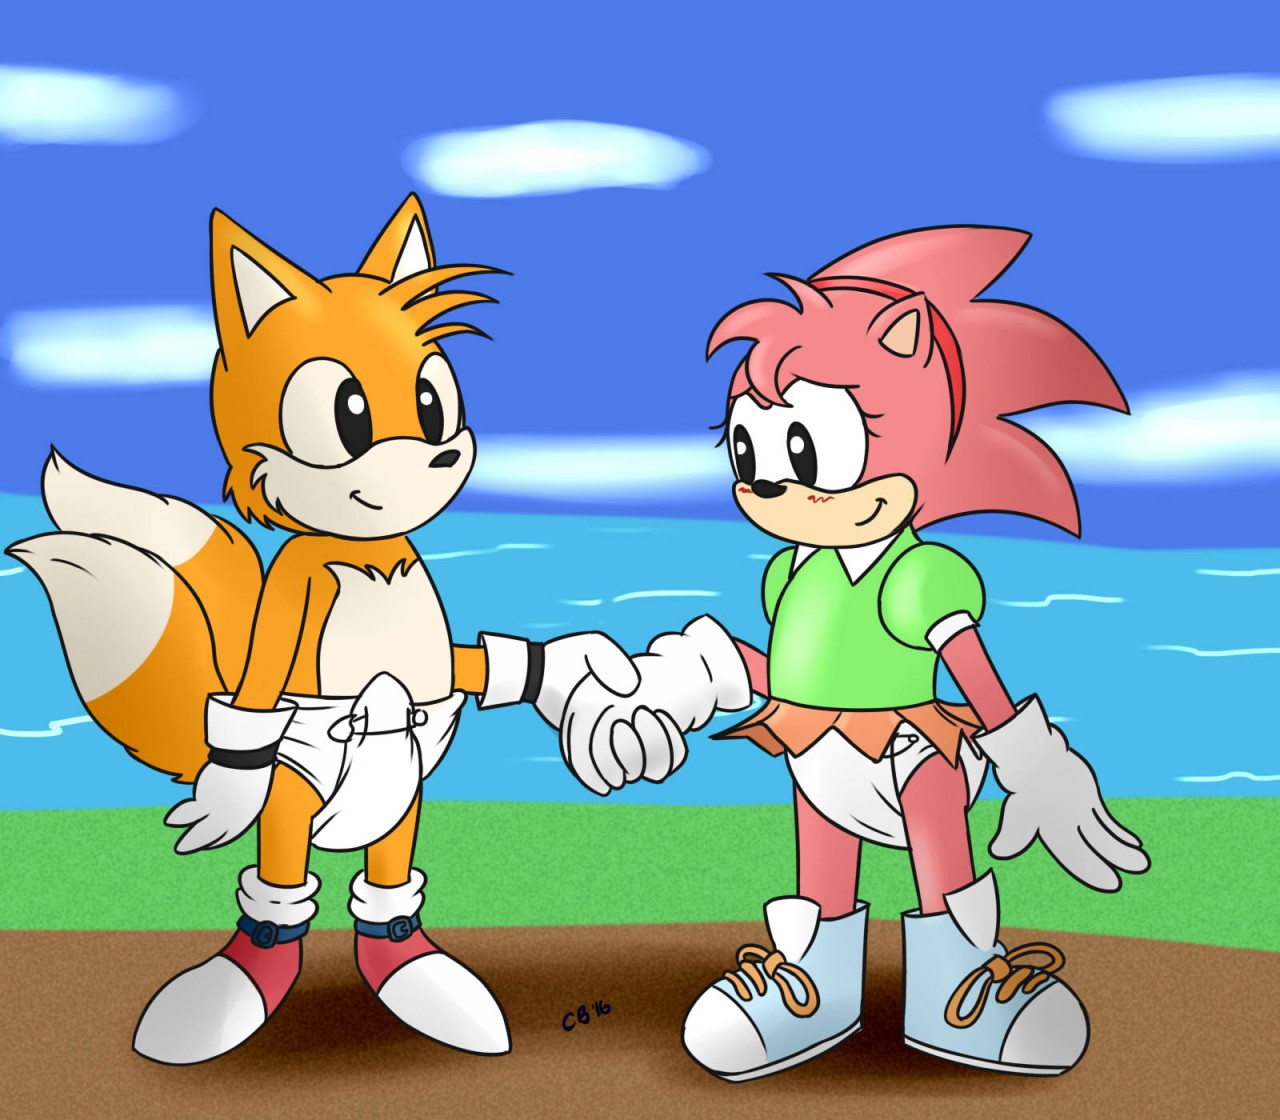 little tails <3, baby tails <3<3, prepressdig